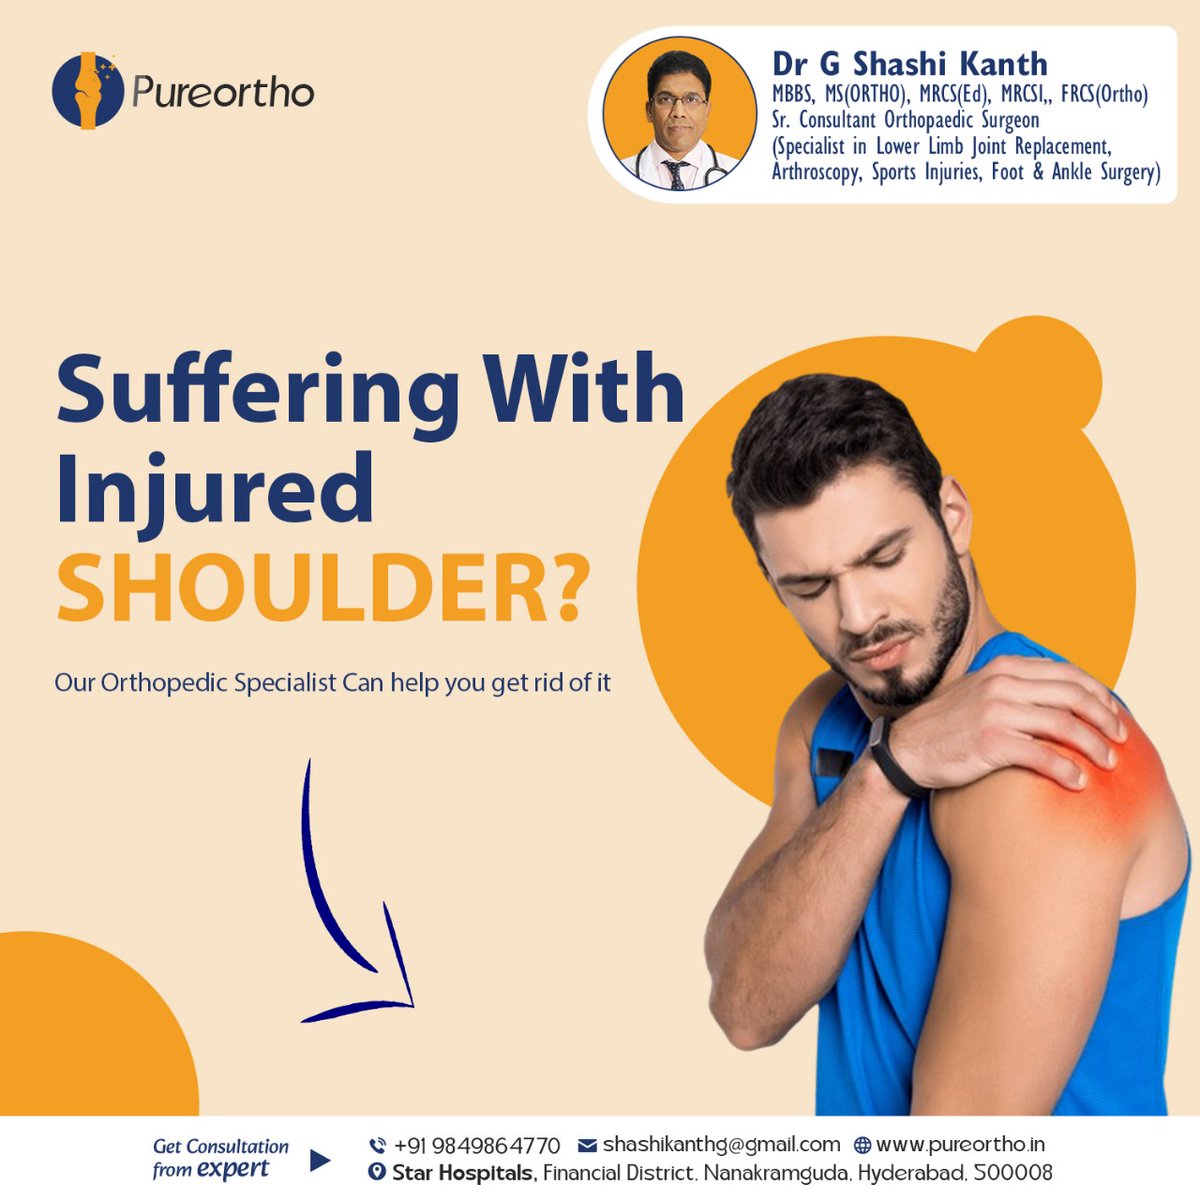 🩹 Struggling with a shoulder injury? Let Puro Ortho be your guide to recovery! Our Orthopedic specialists are here to help you bid farewell to shoulder pain and regain strength. Say goodbye to discomfort and hello to a healthier, pain-free you! 💪
#ShoulderRelief #PuroOrthoCare